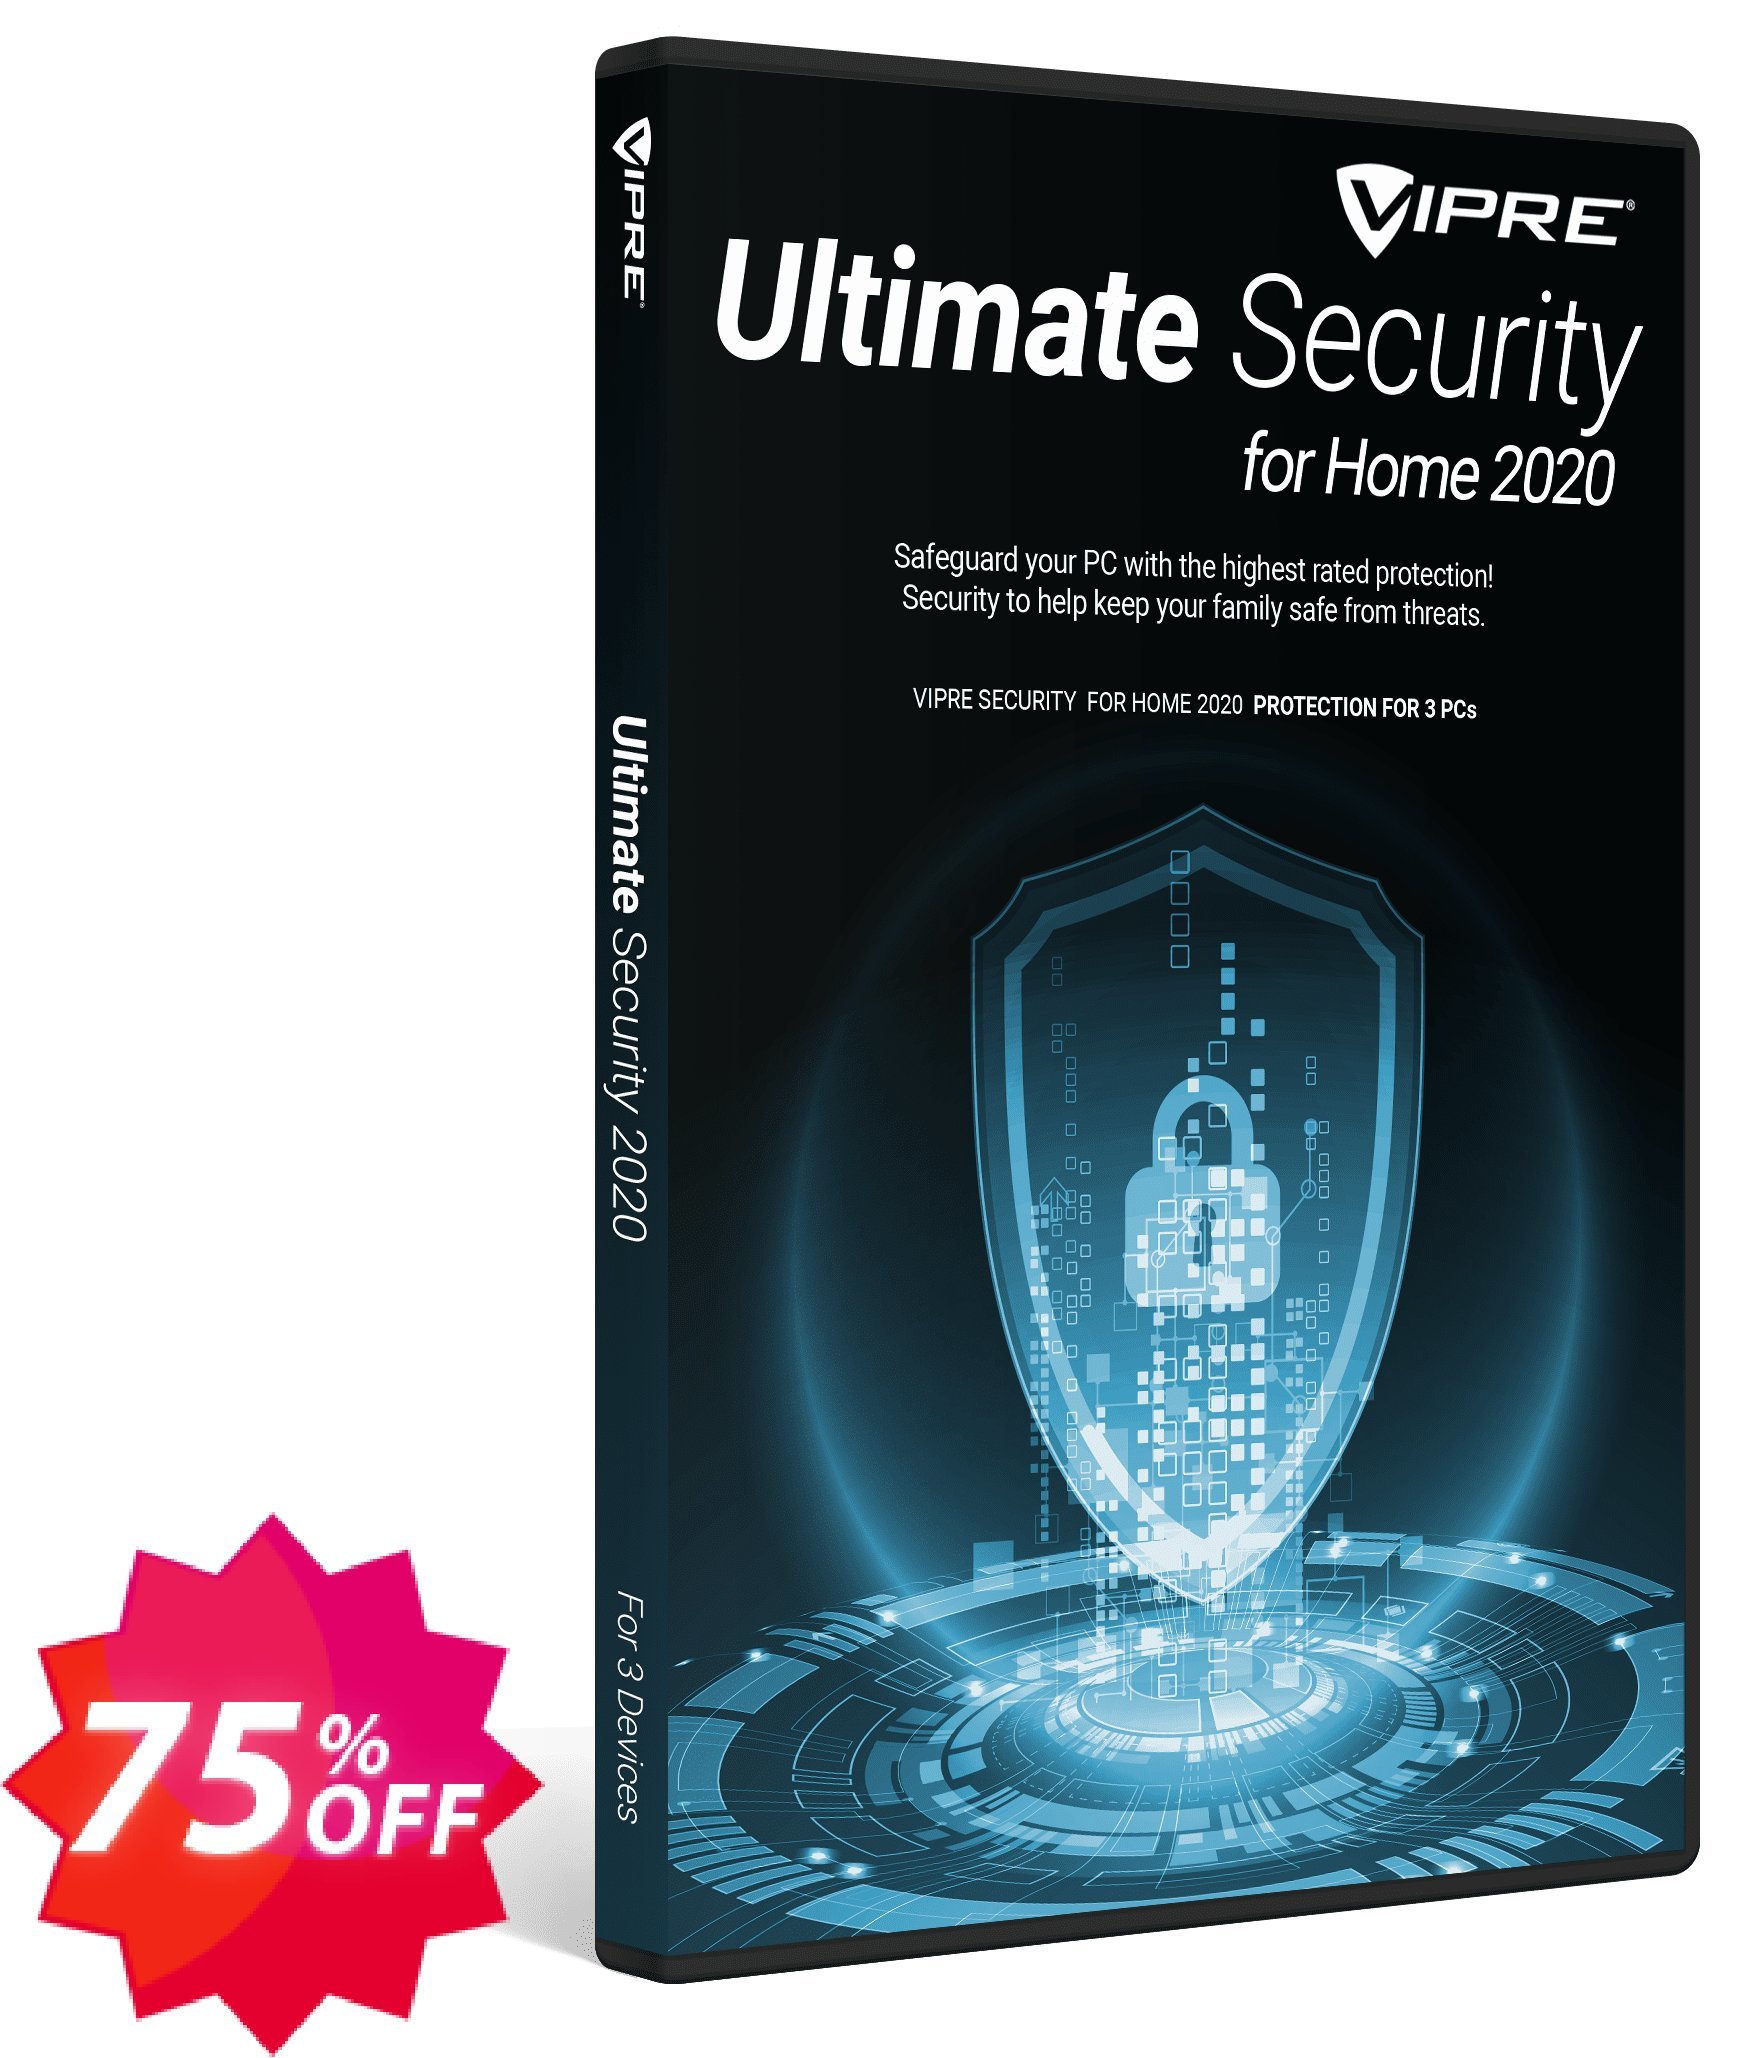 VIPRE Ultimate Security Bundle for Home Coupon code 75% discount 